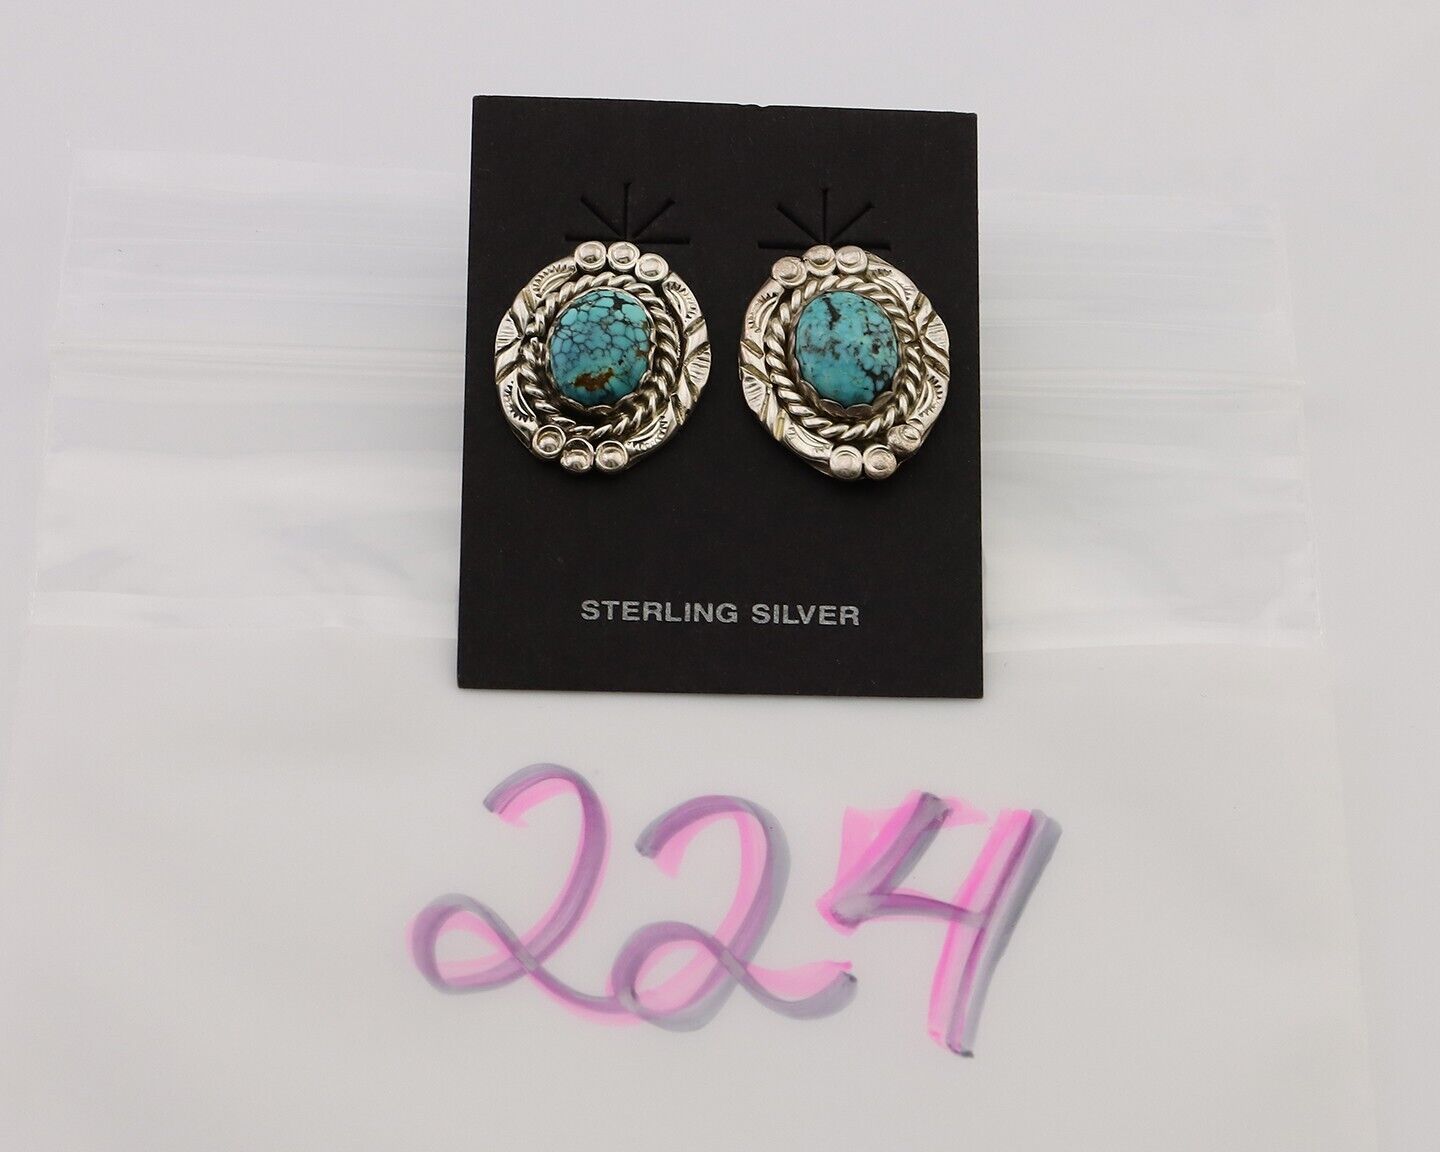 Navajo Earrings 925 Silver Spiderweb Mined Turquoise Artist Signed NE C.80's